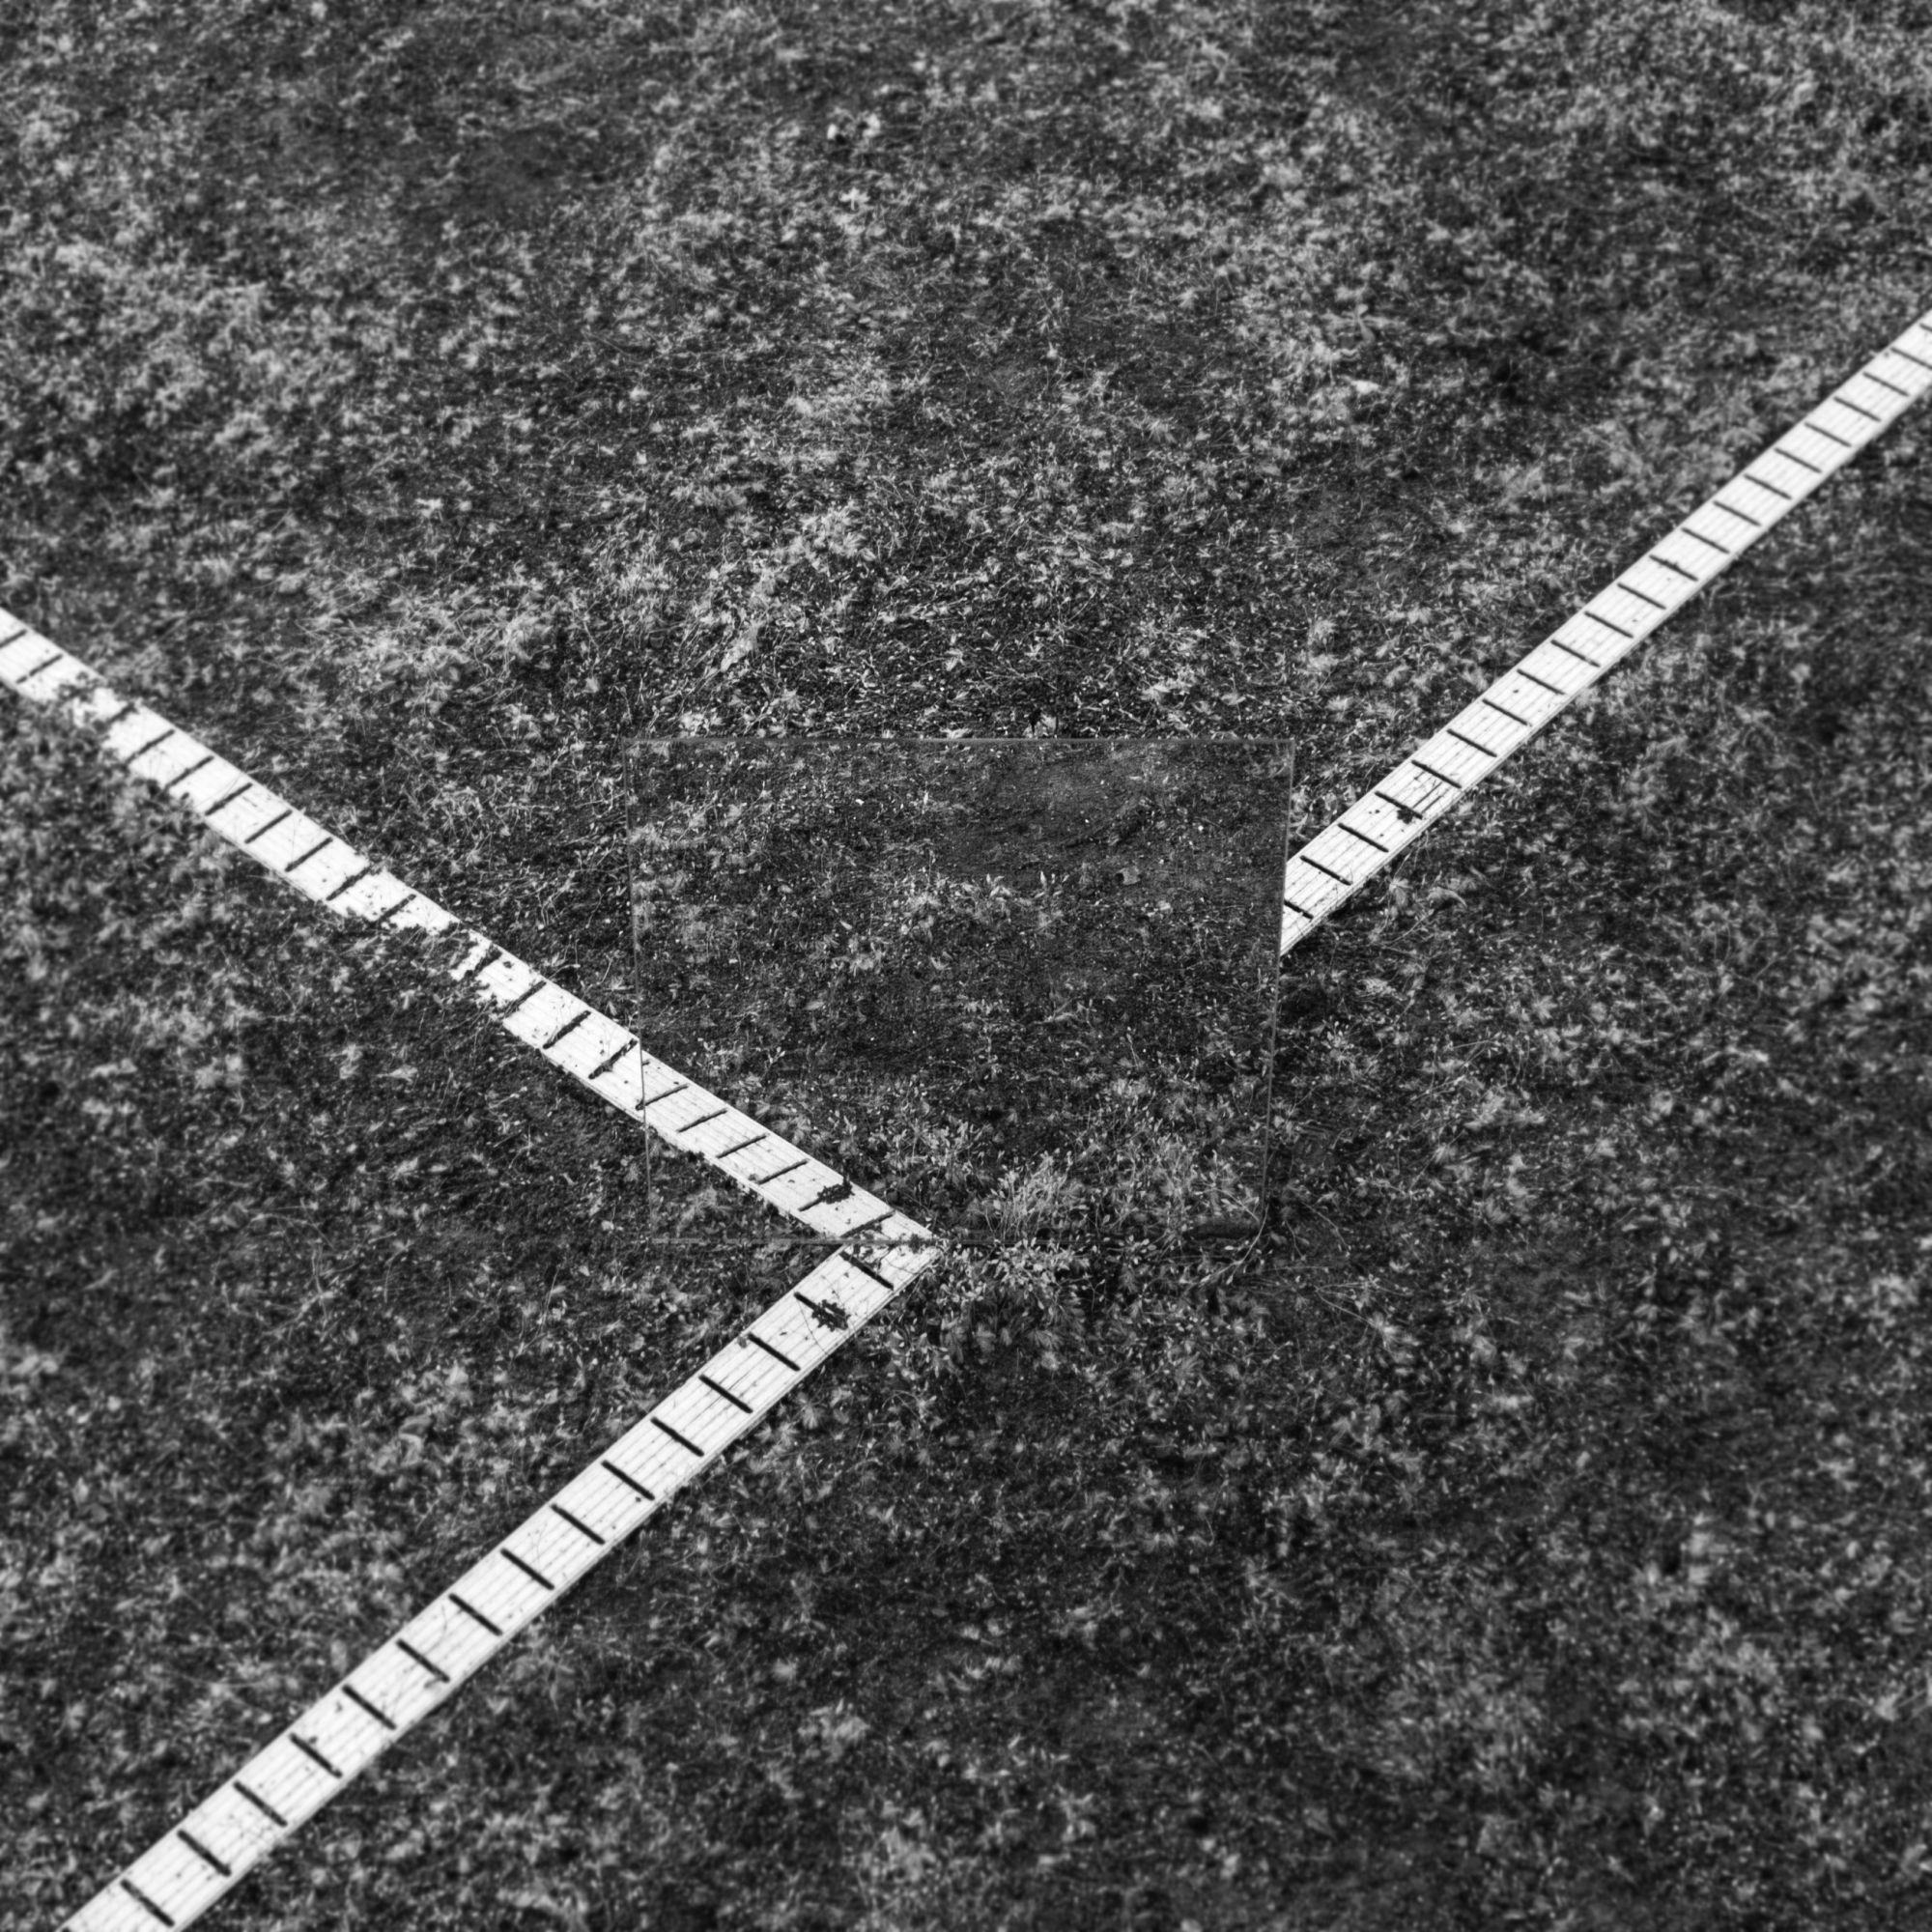 Tennis Court (Double Fault With Mirror) 